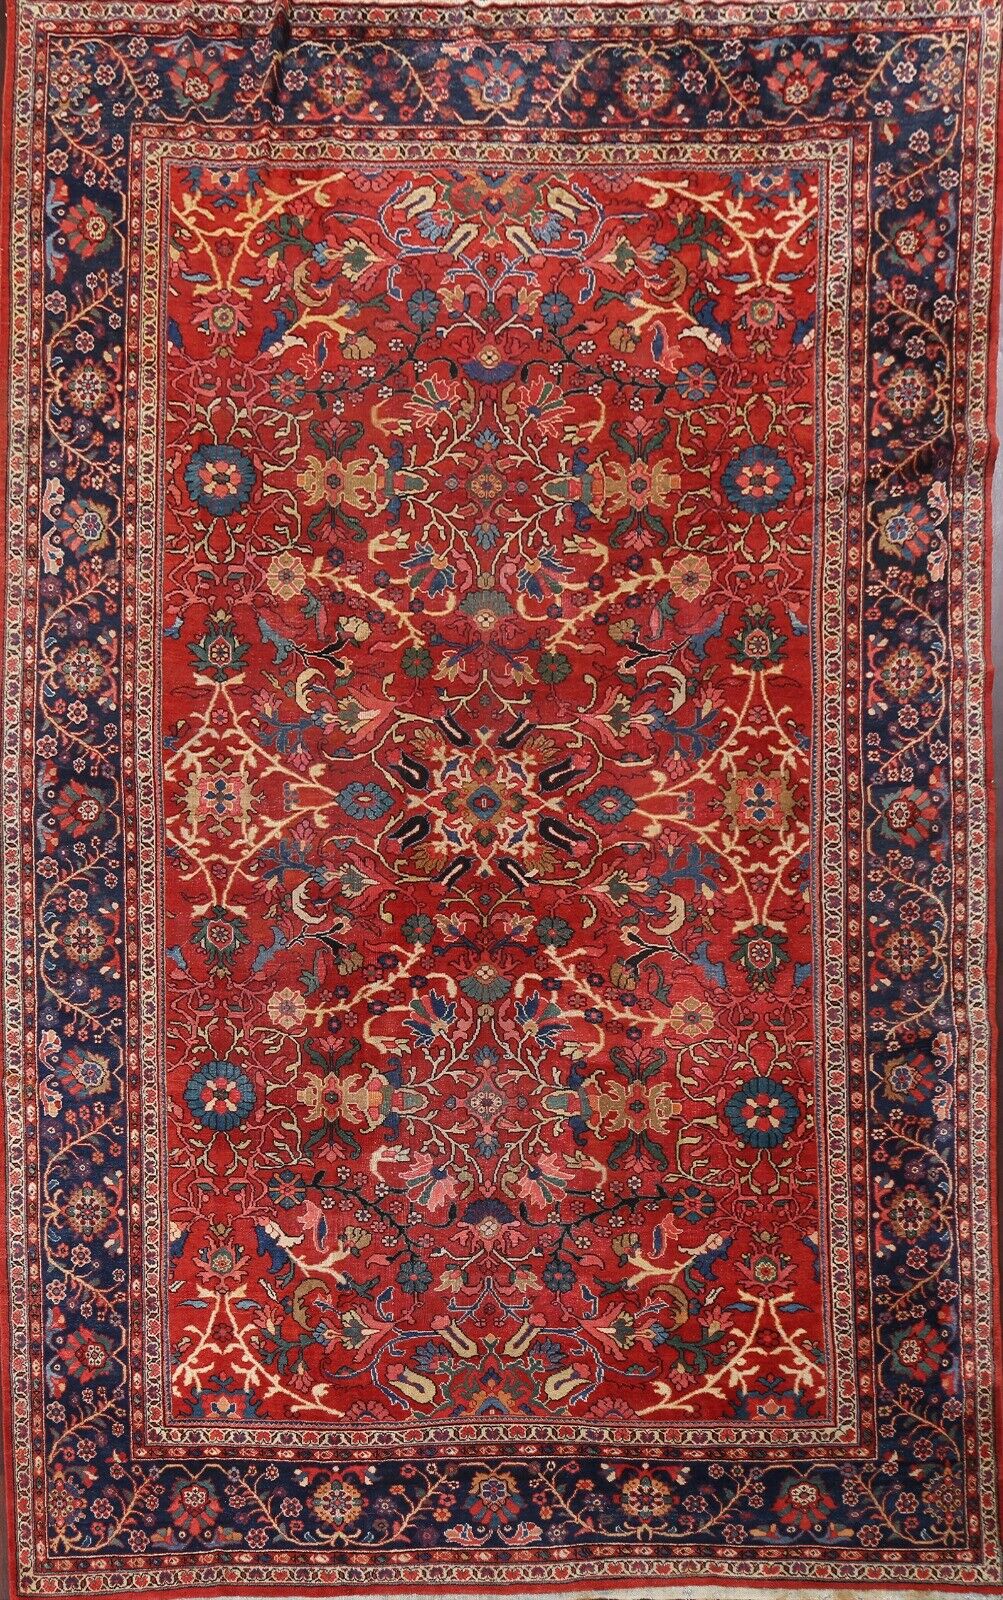 Antique Vegetable Dye Geometric Mahal Area Rug Hand-knotted Large Carpet 10\'x14\'